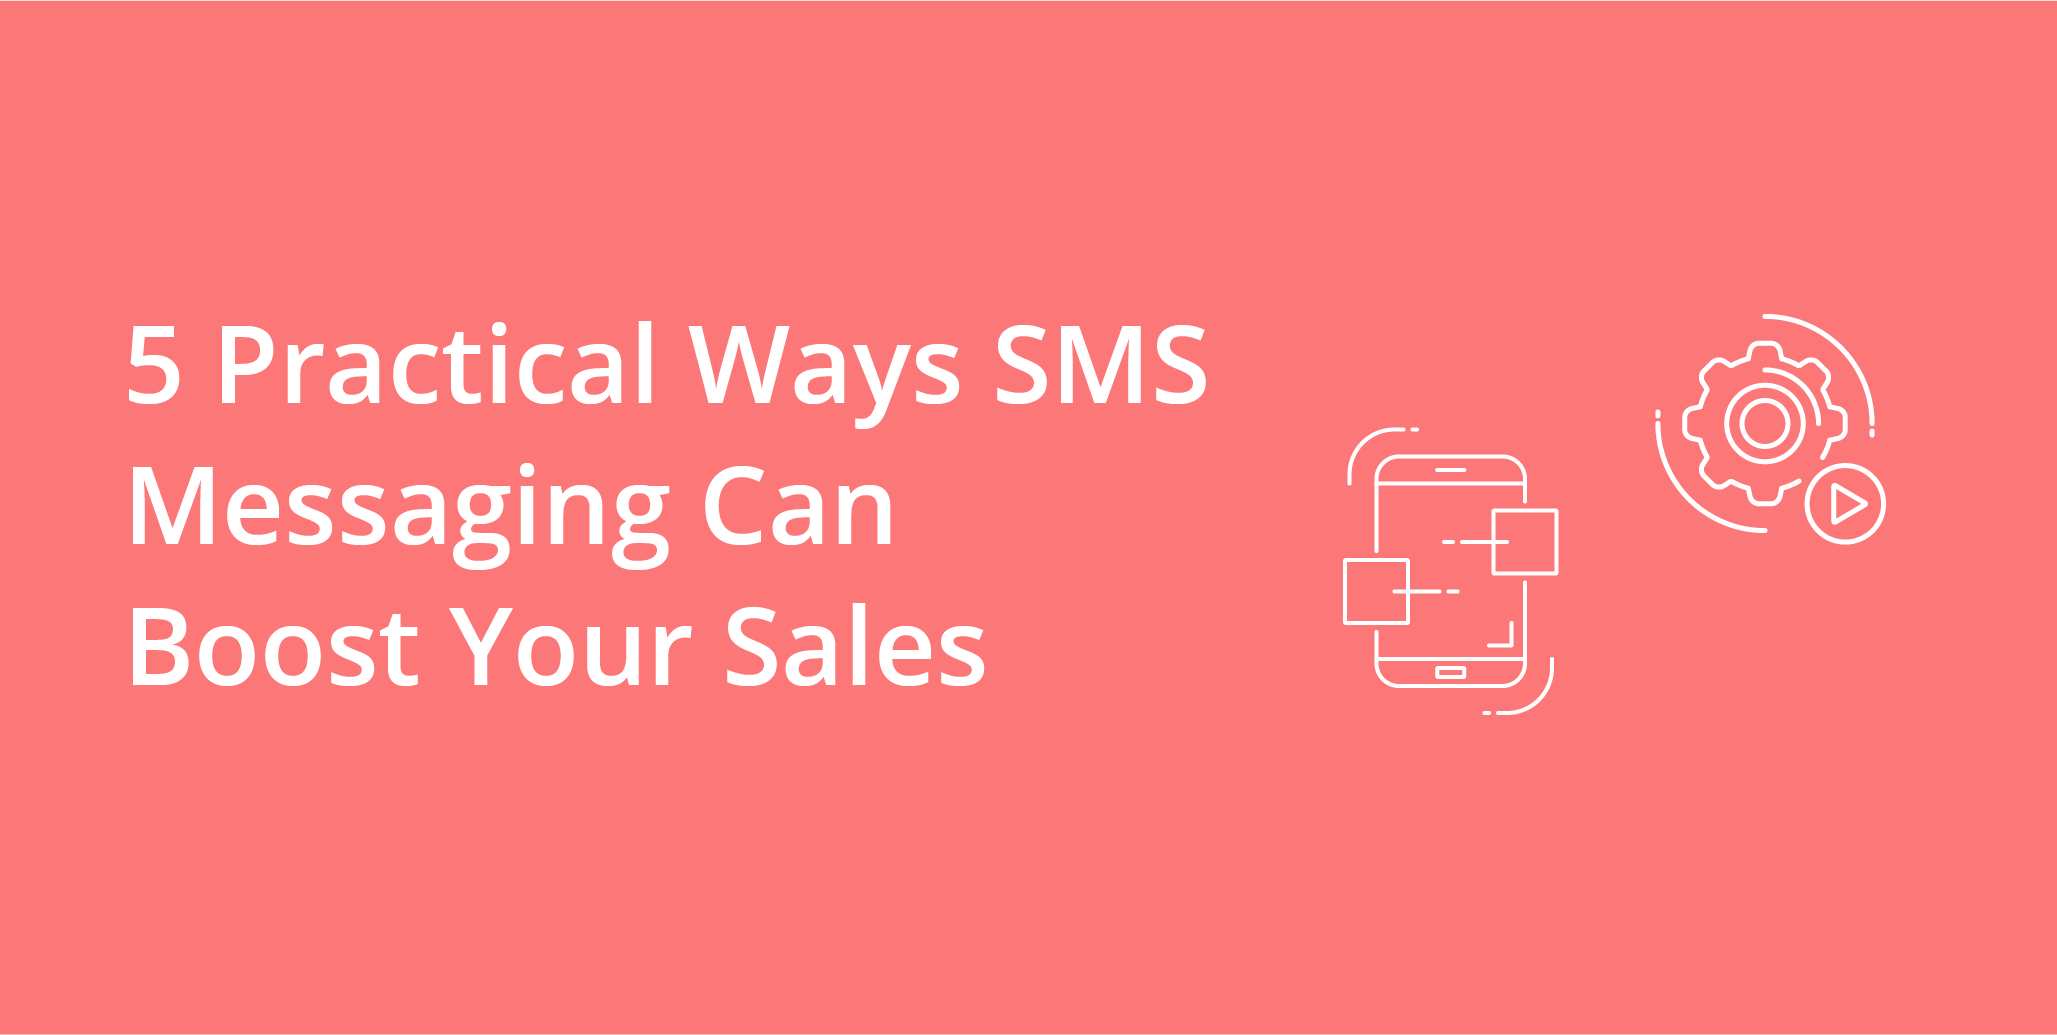 5 Practical Ways SMS Messaging Can Boost Your Sales | Telephones for business